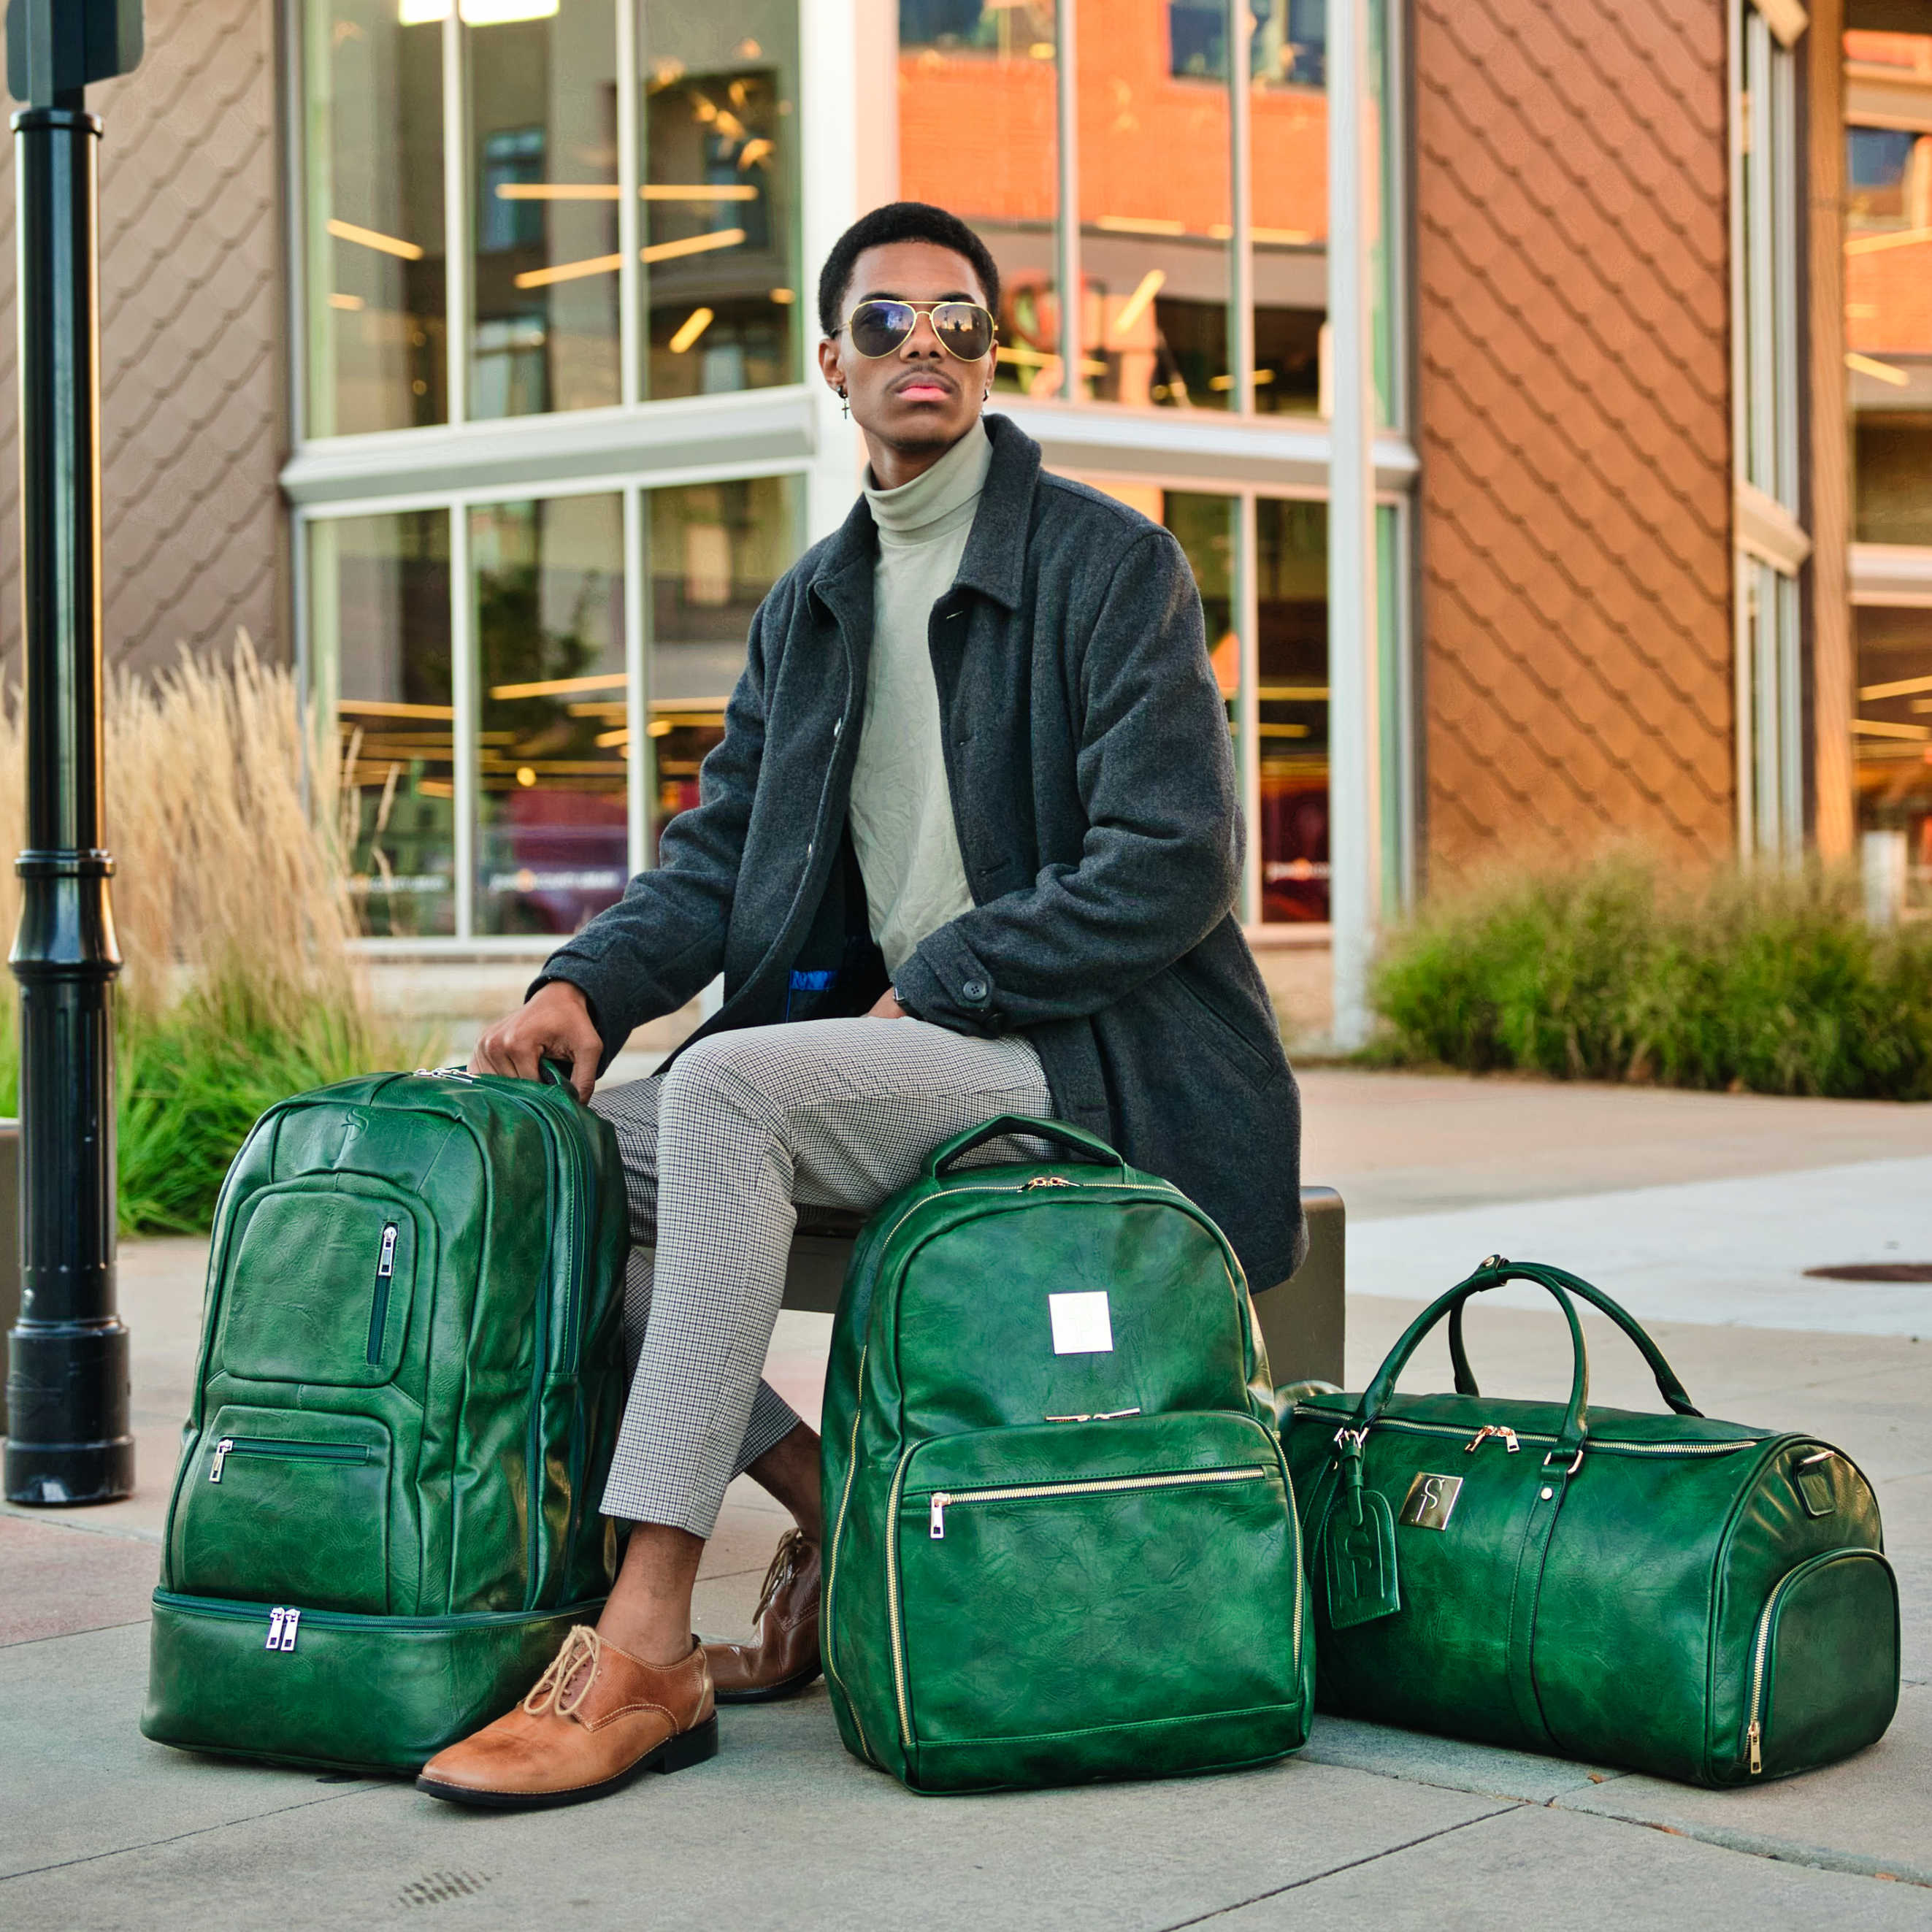 Emerald Green Luciano Leather 3 Bag Set - Sole Premise